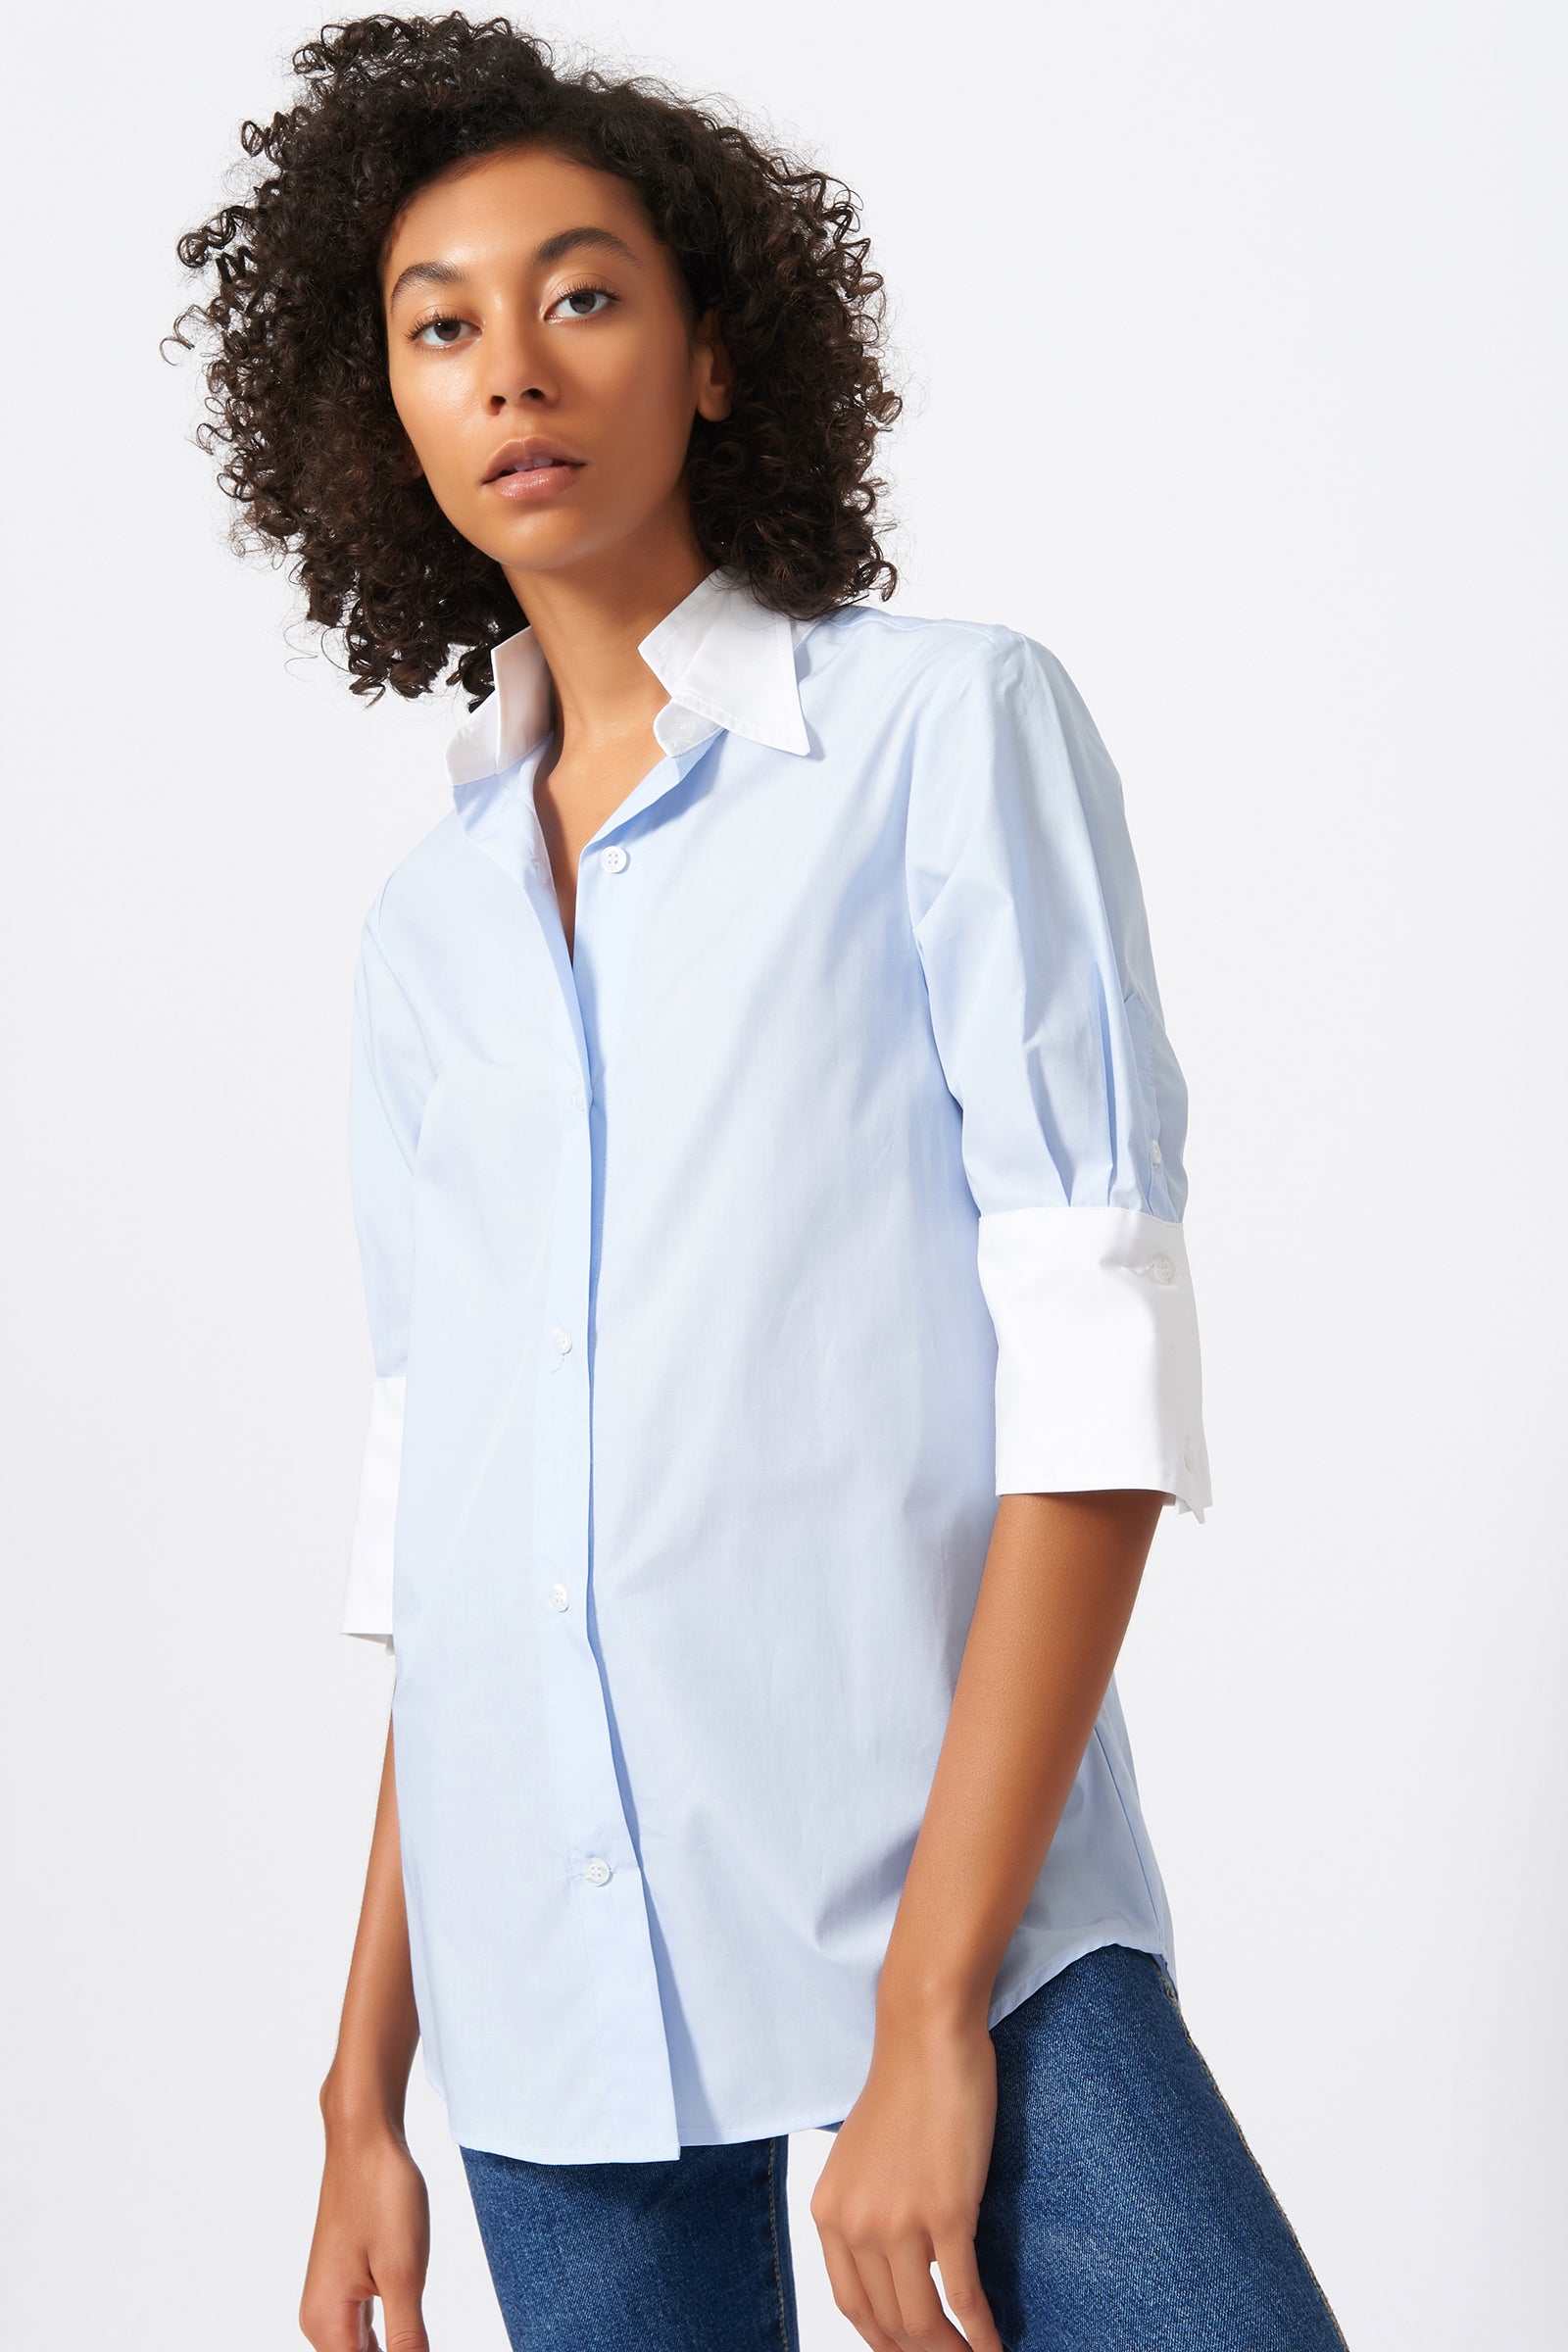 Kal Rieman Double Collar Shirt in Oxford and White Cotton Poplin on Model Front View